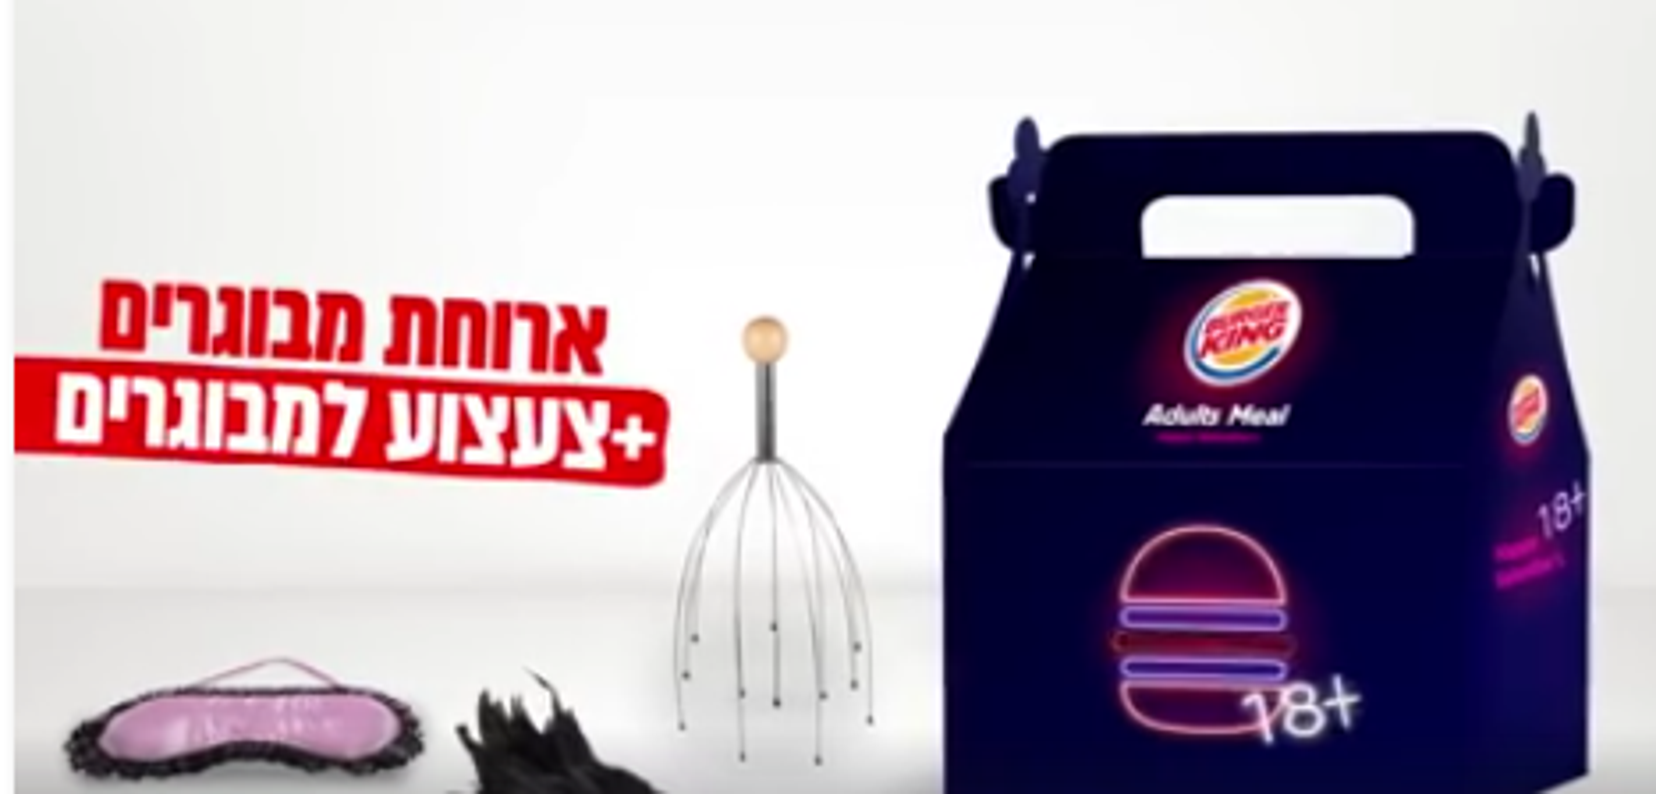 This Burger King Is Giving Away Sex Toys With Adults Meal For